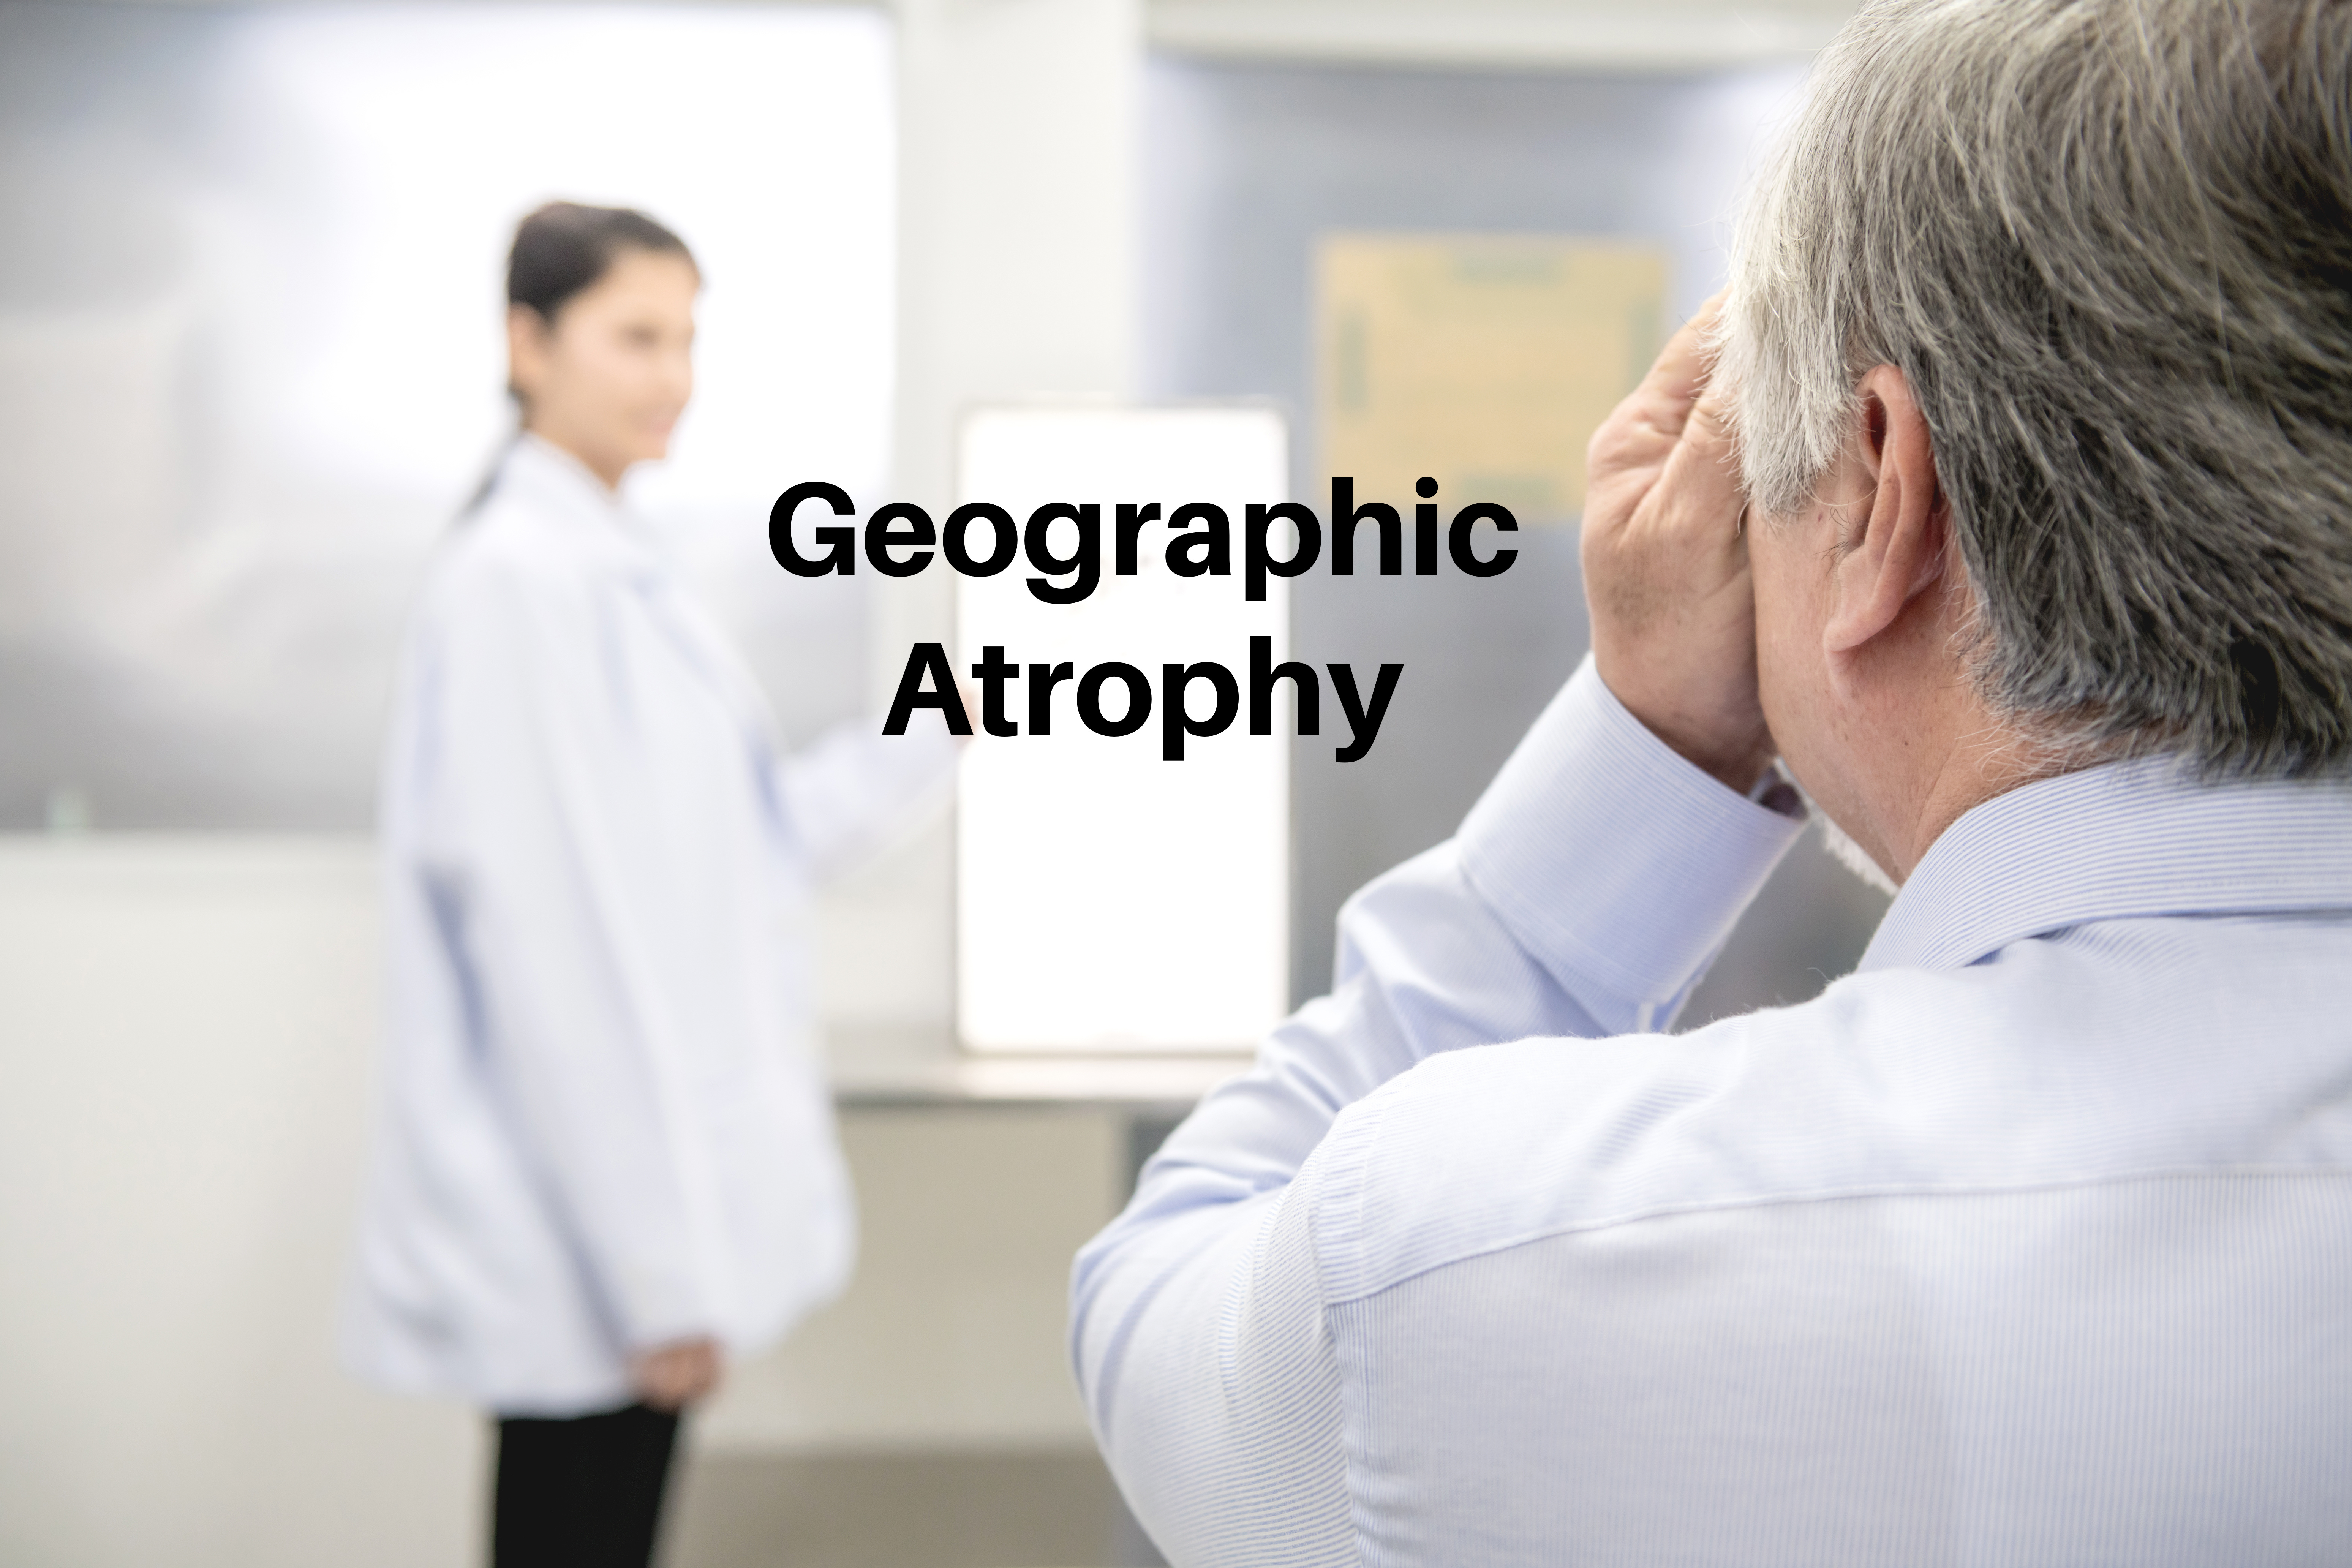 geographic atrophy words eye doctor office